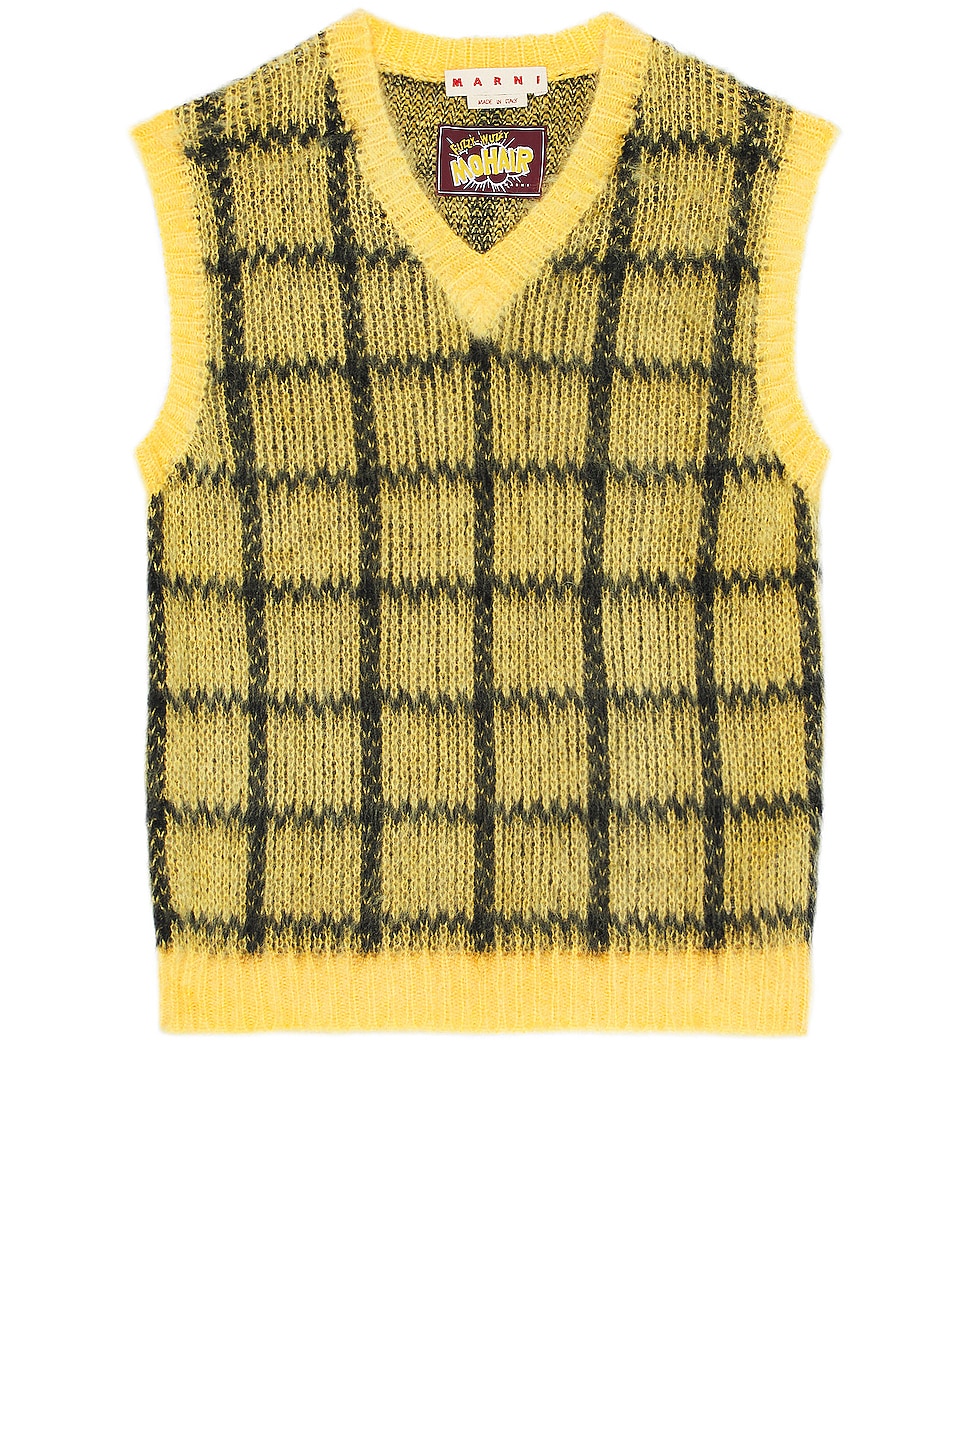 Image 1 of Marni V Neck Sweater in Maize